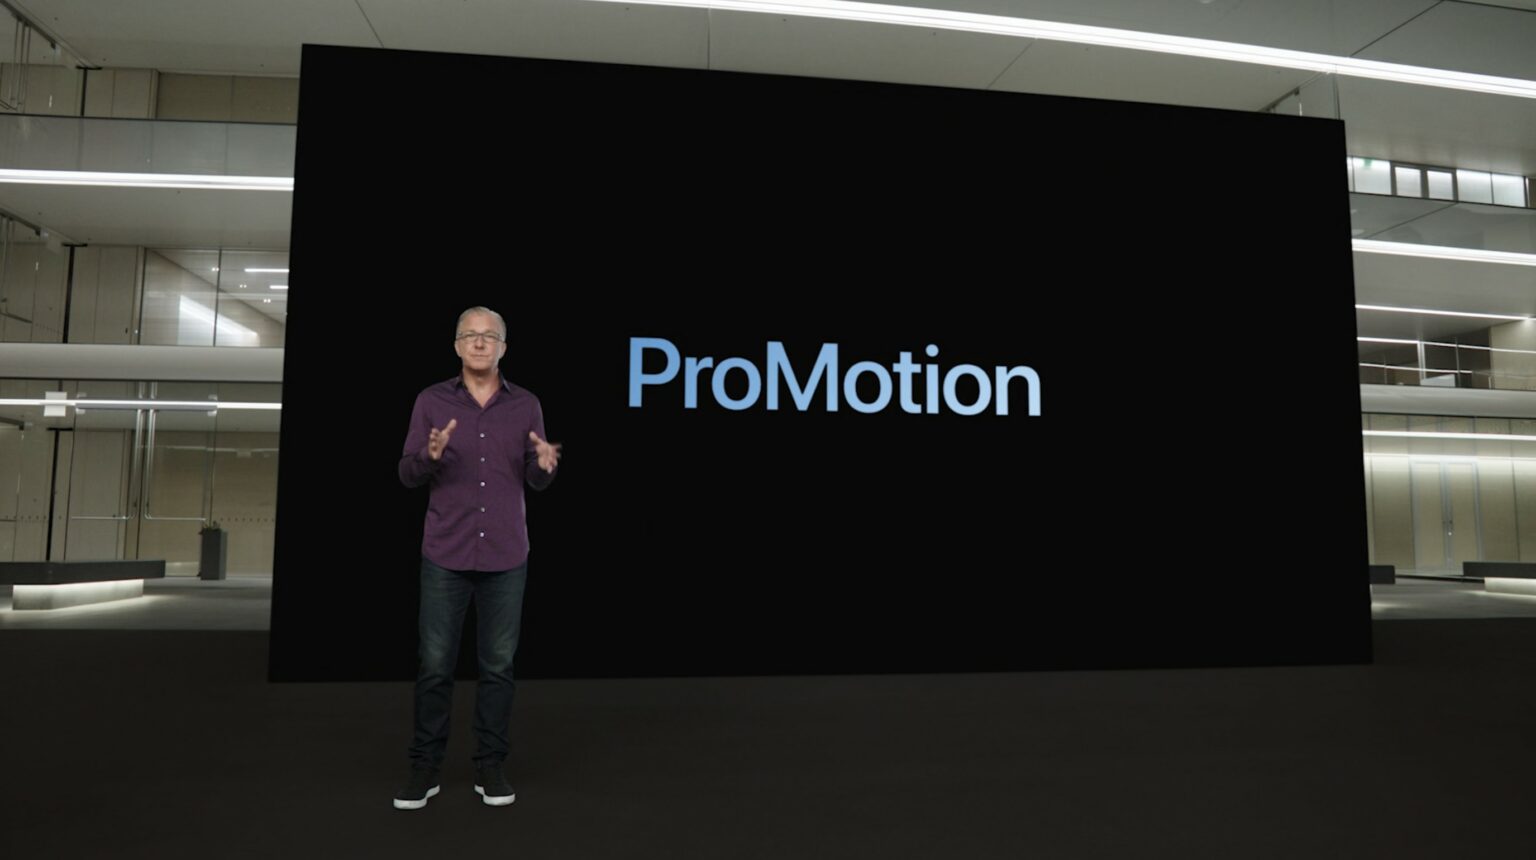 iPhone 13 Pro models get Apple's ProMotion display technology.